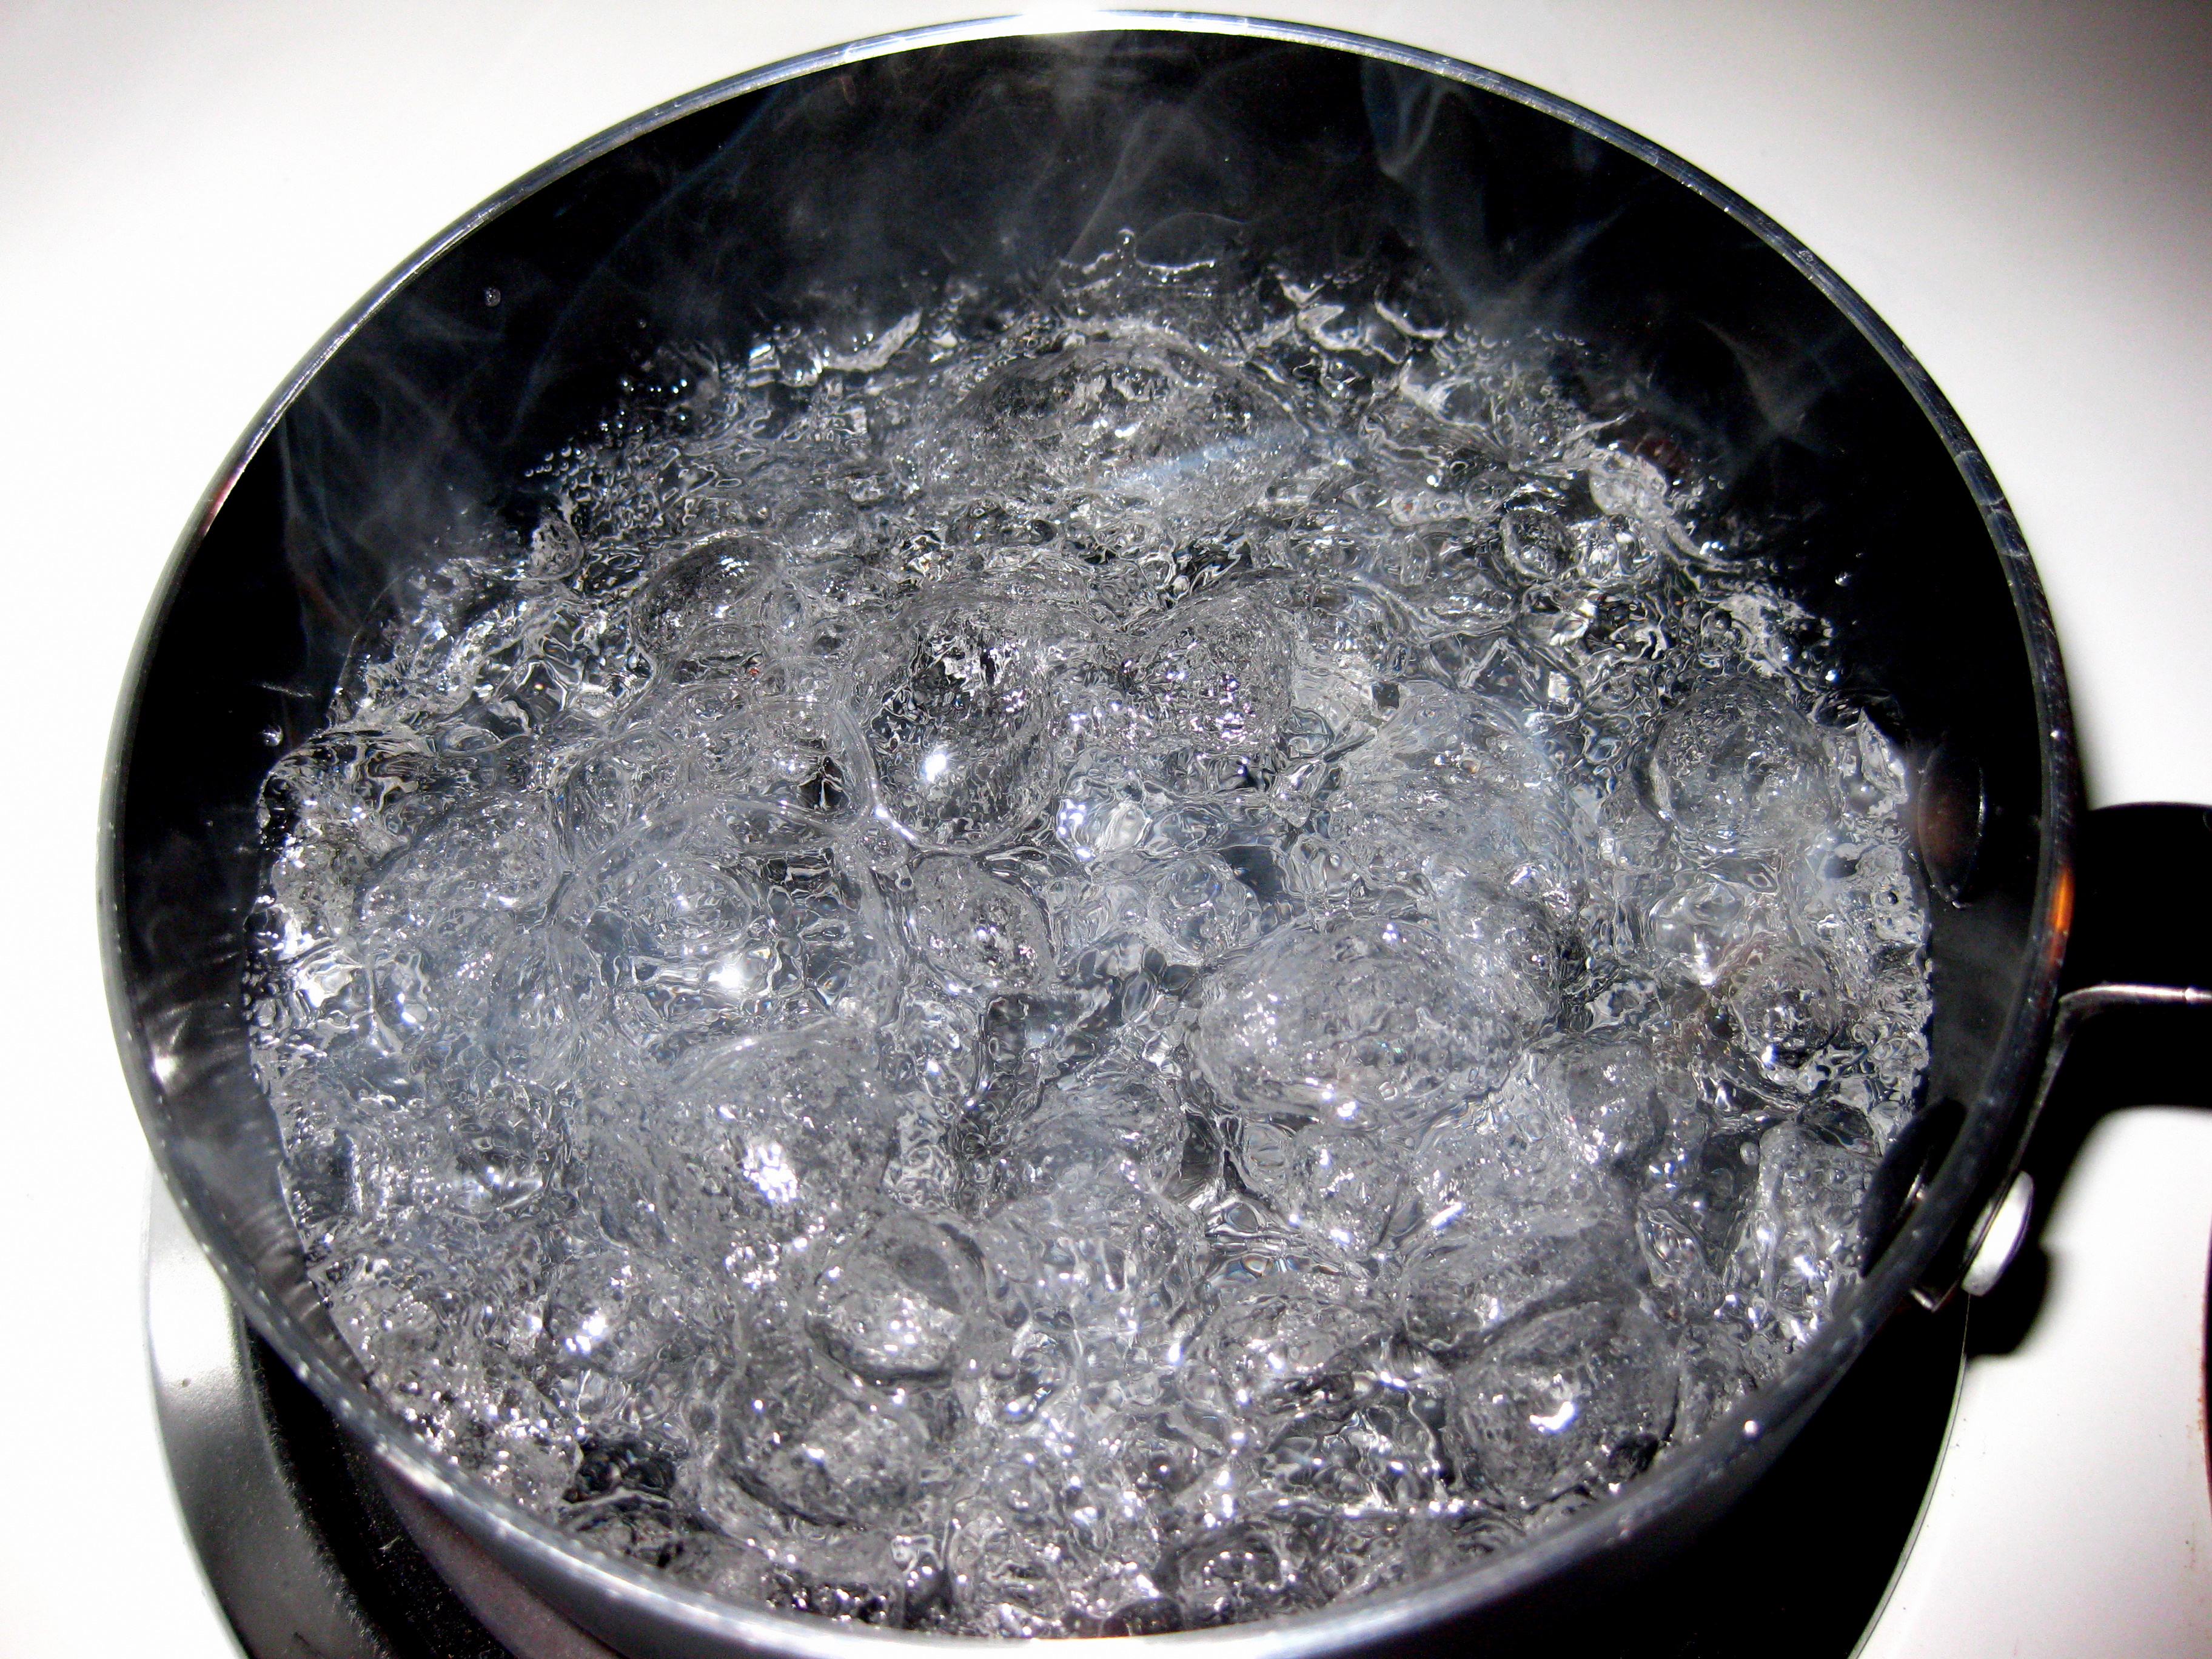 If you need to boil water, always start with cold water from the tap. Hot water is never safe to cook with or drink.